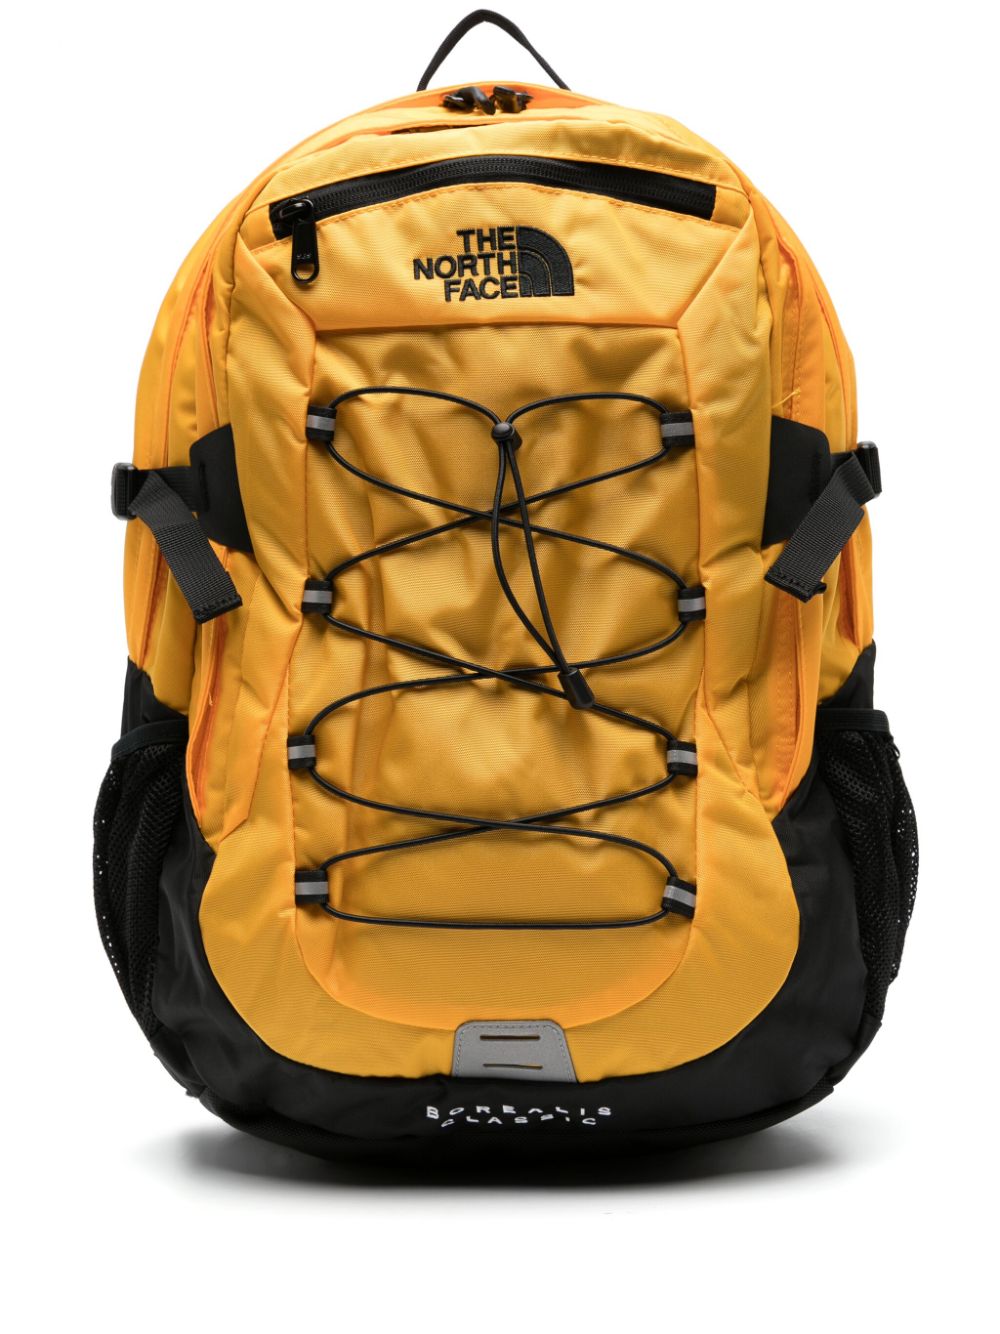 The North Face Borealis Classic waterproof backpack - Yellow